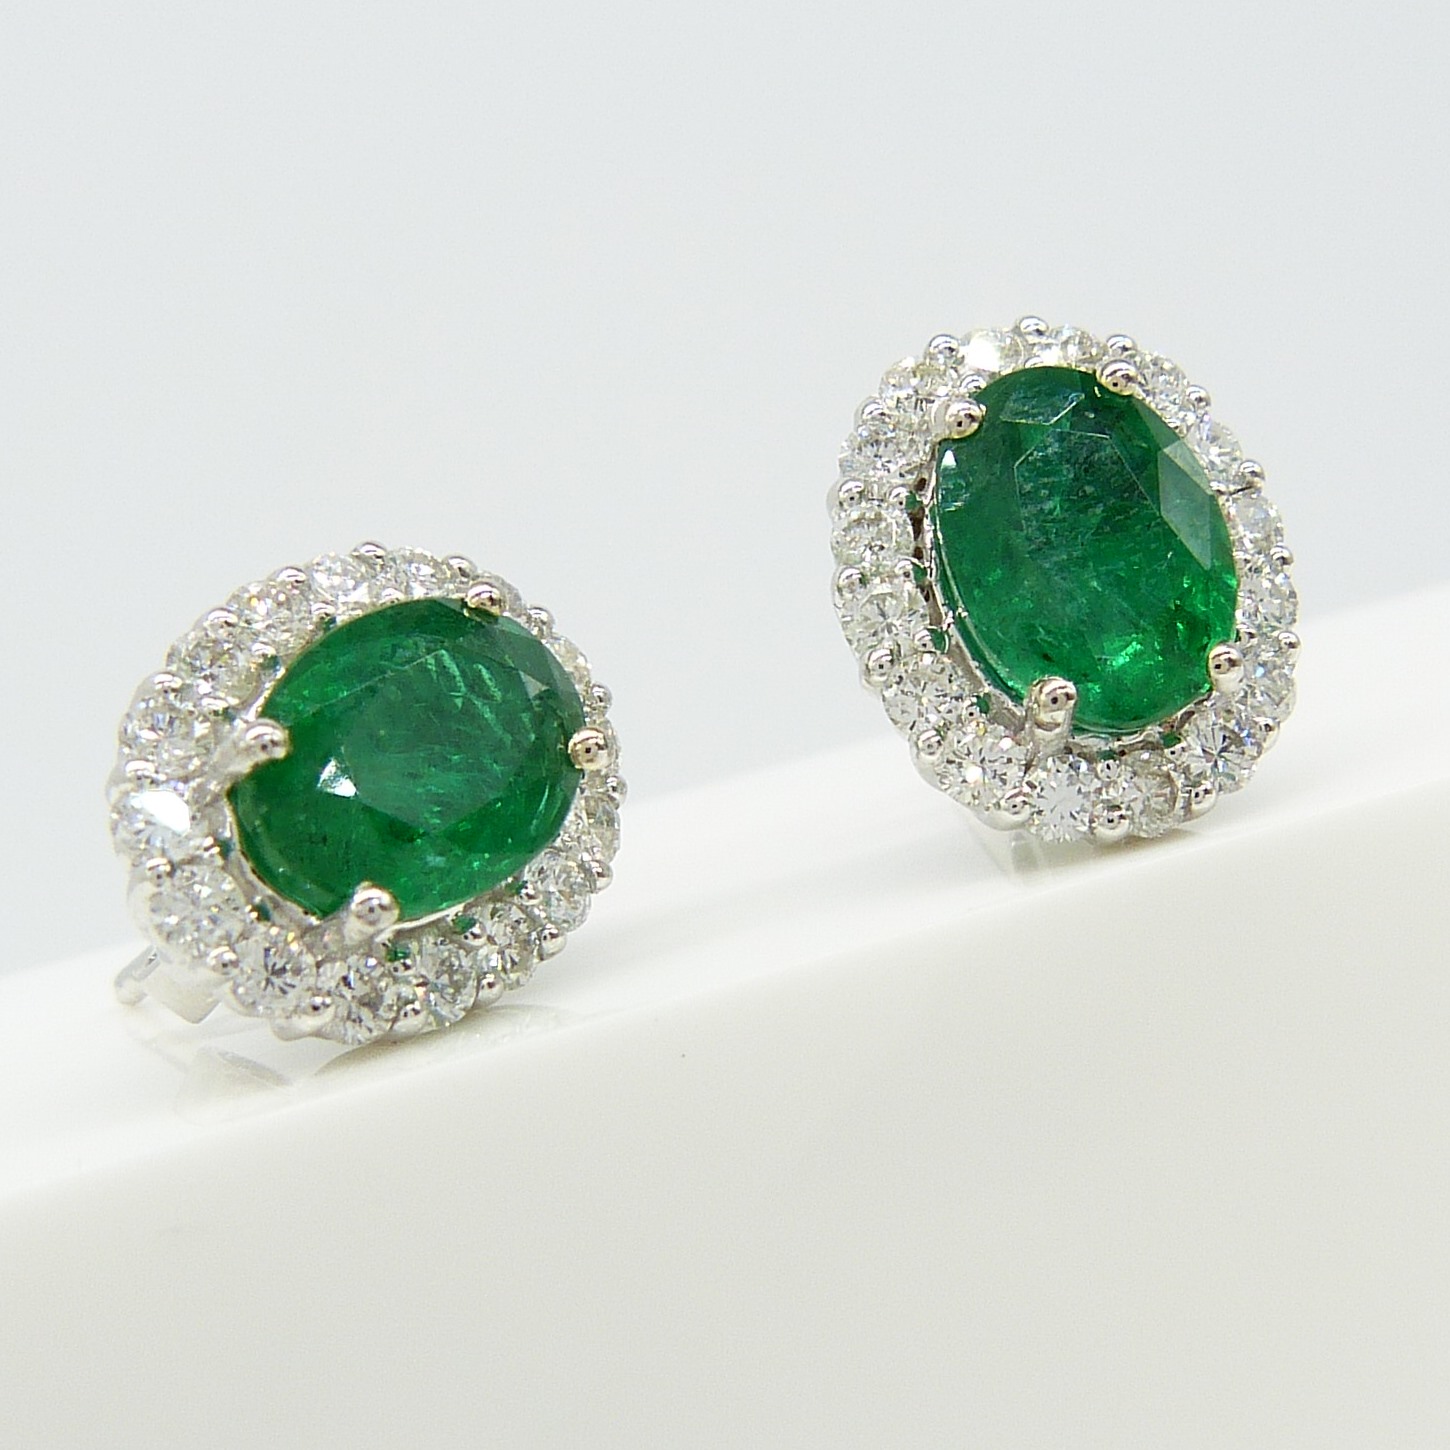 Pair of 18ct white gold 2.48 carat emerald and diamond halo ear studs, boxed - Image 6 of 8